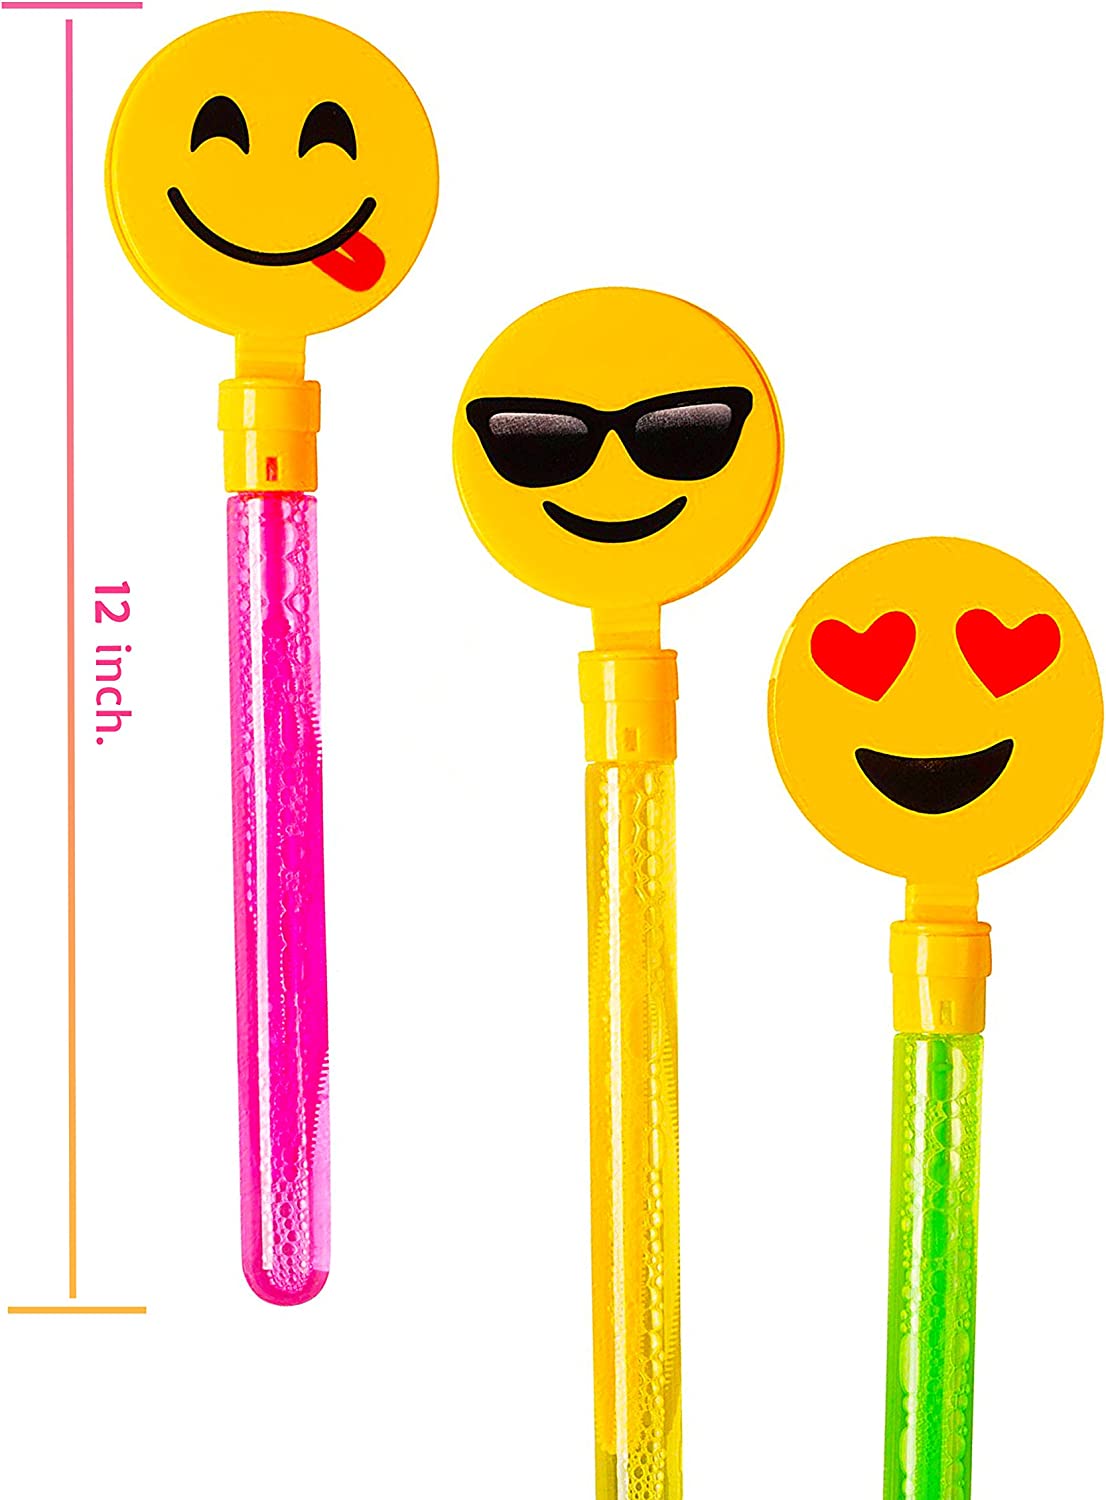 12 Pack Giant Bubble Wands Emoji Party Favor Toys